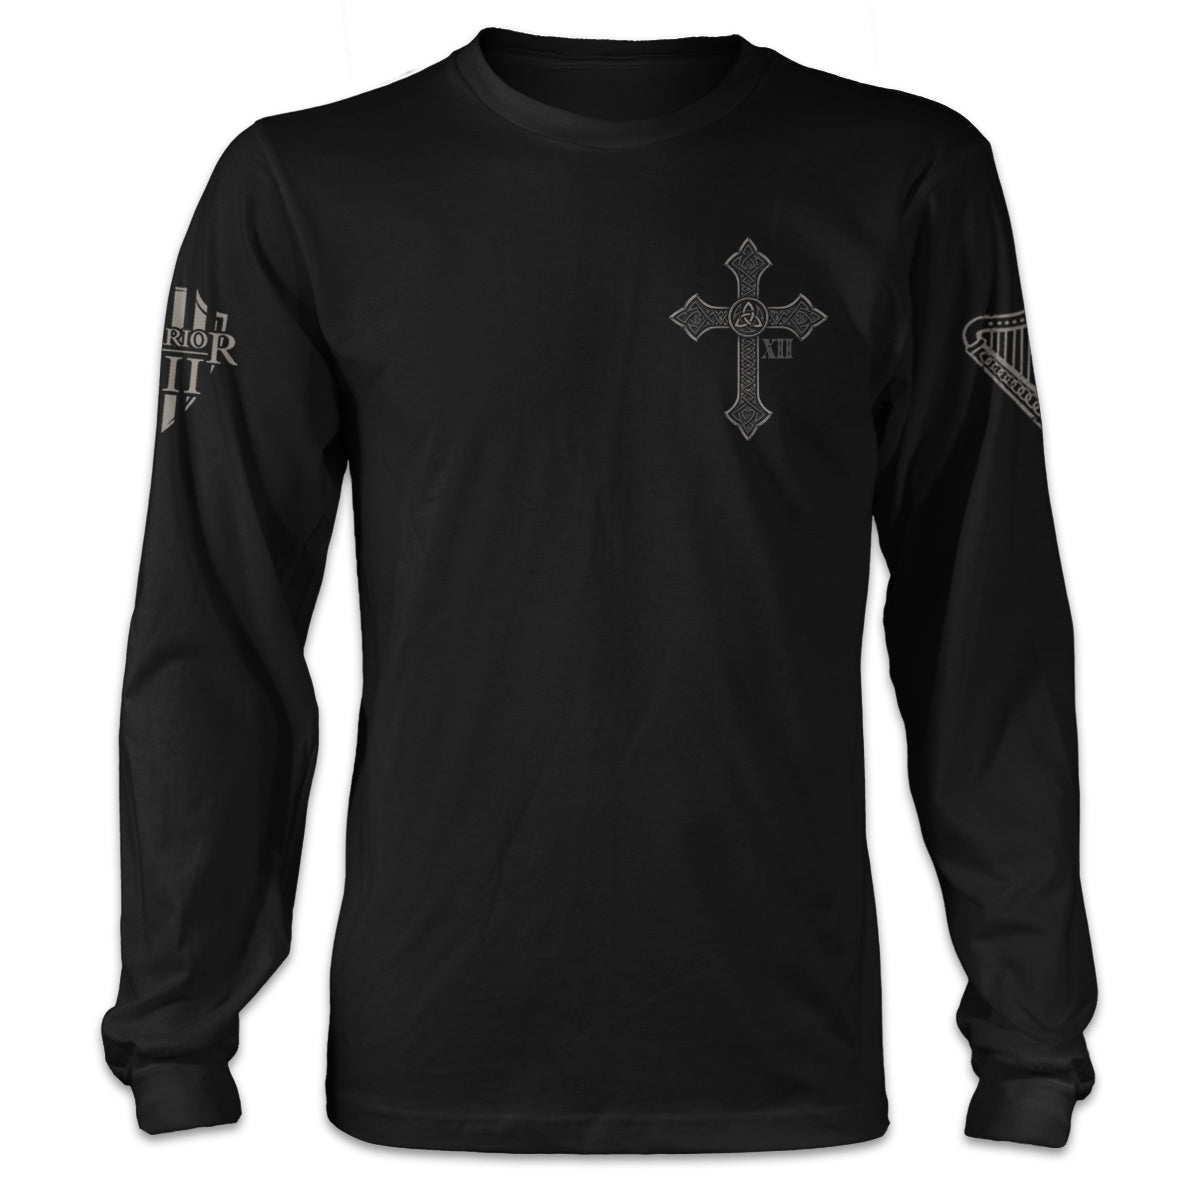 A black long sleeve shirt with an Irish cross printed on the front of the shirt.